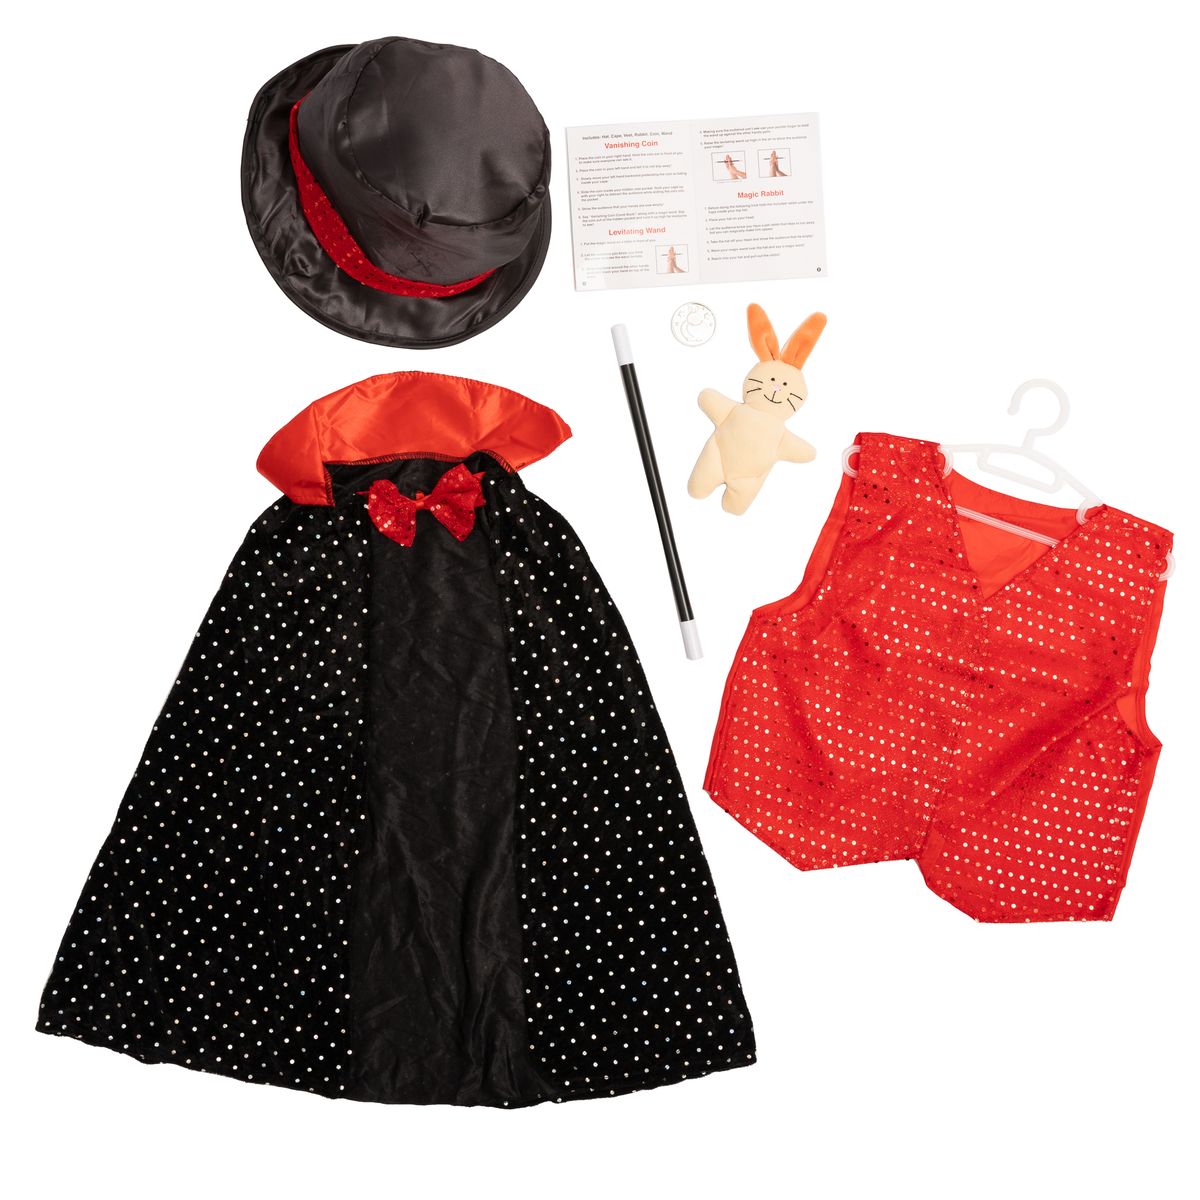 Magician Costume With Accessories | Buy Online in South Africa ...